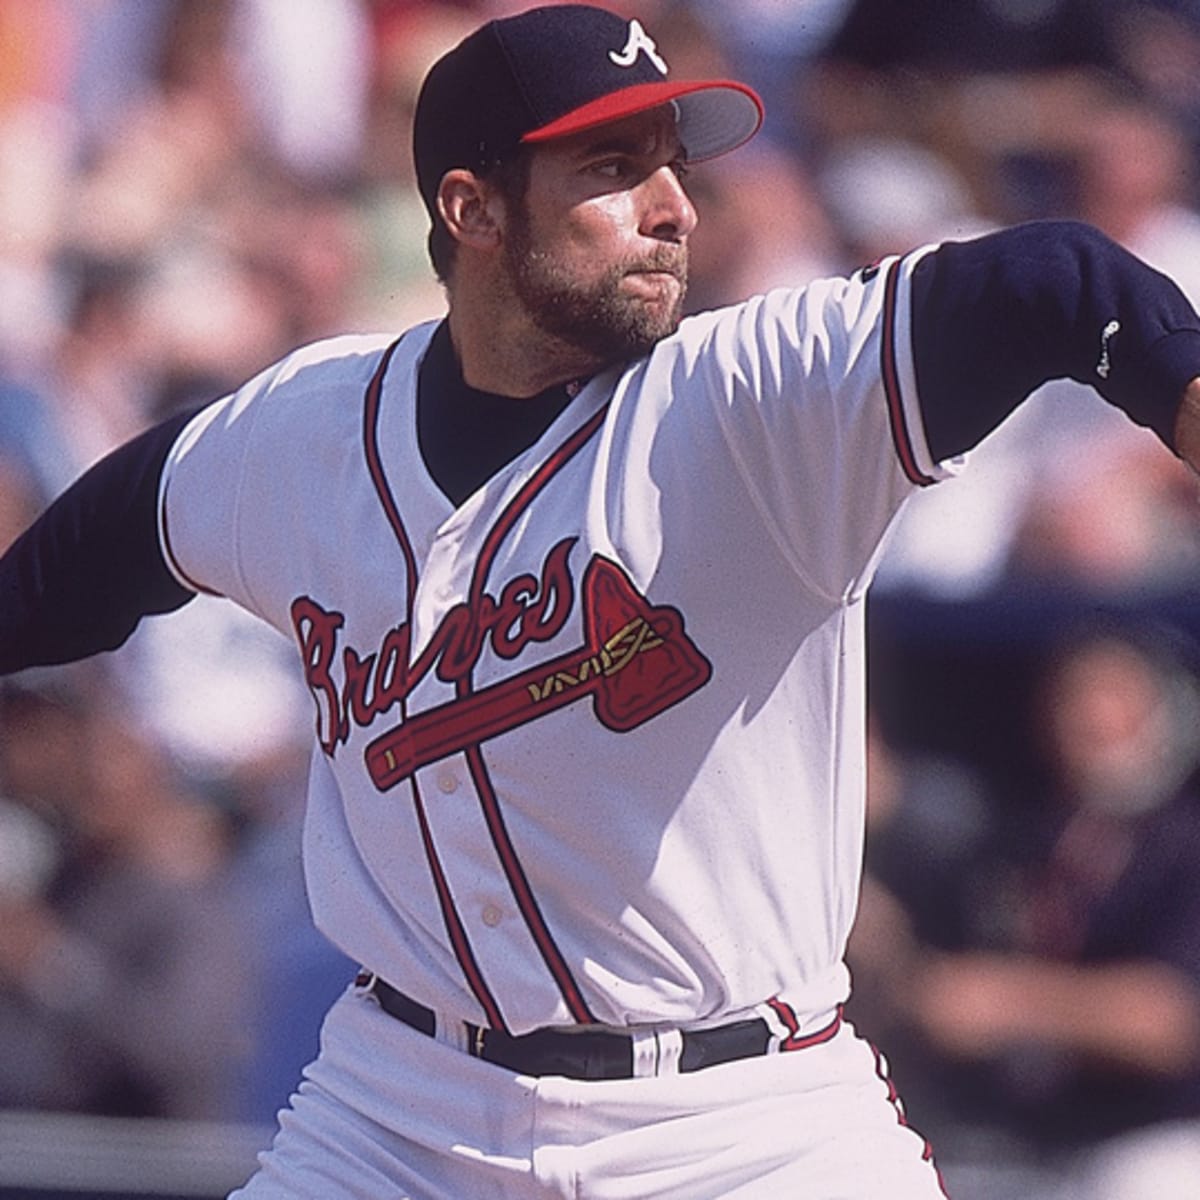 JAWS and the 2015 Hall of Fame ballot: John Smoltz - Sports Illustrated